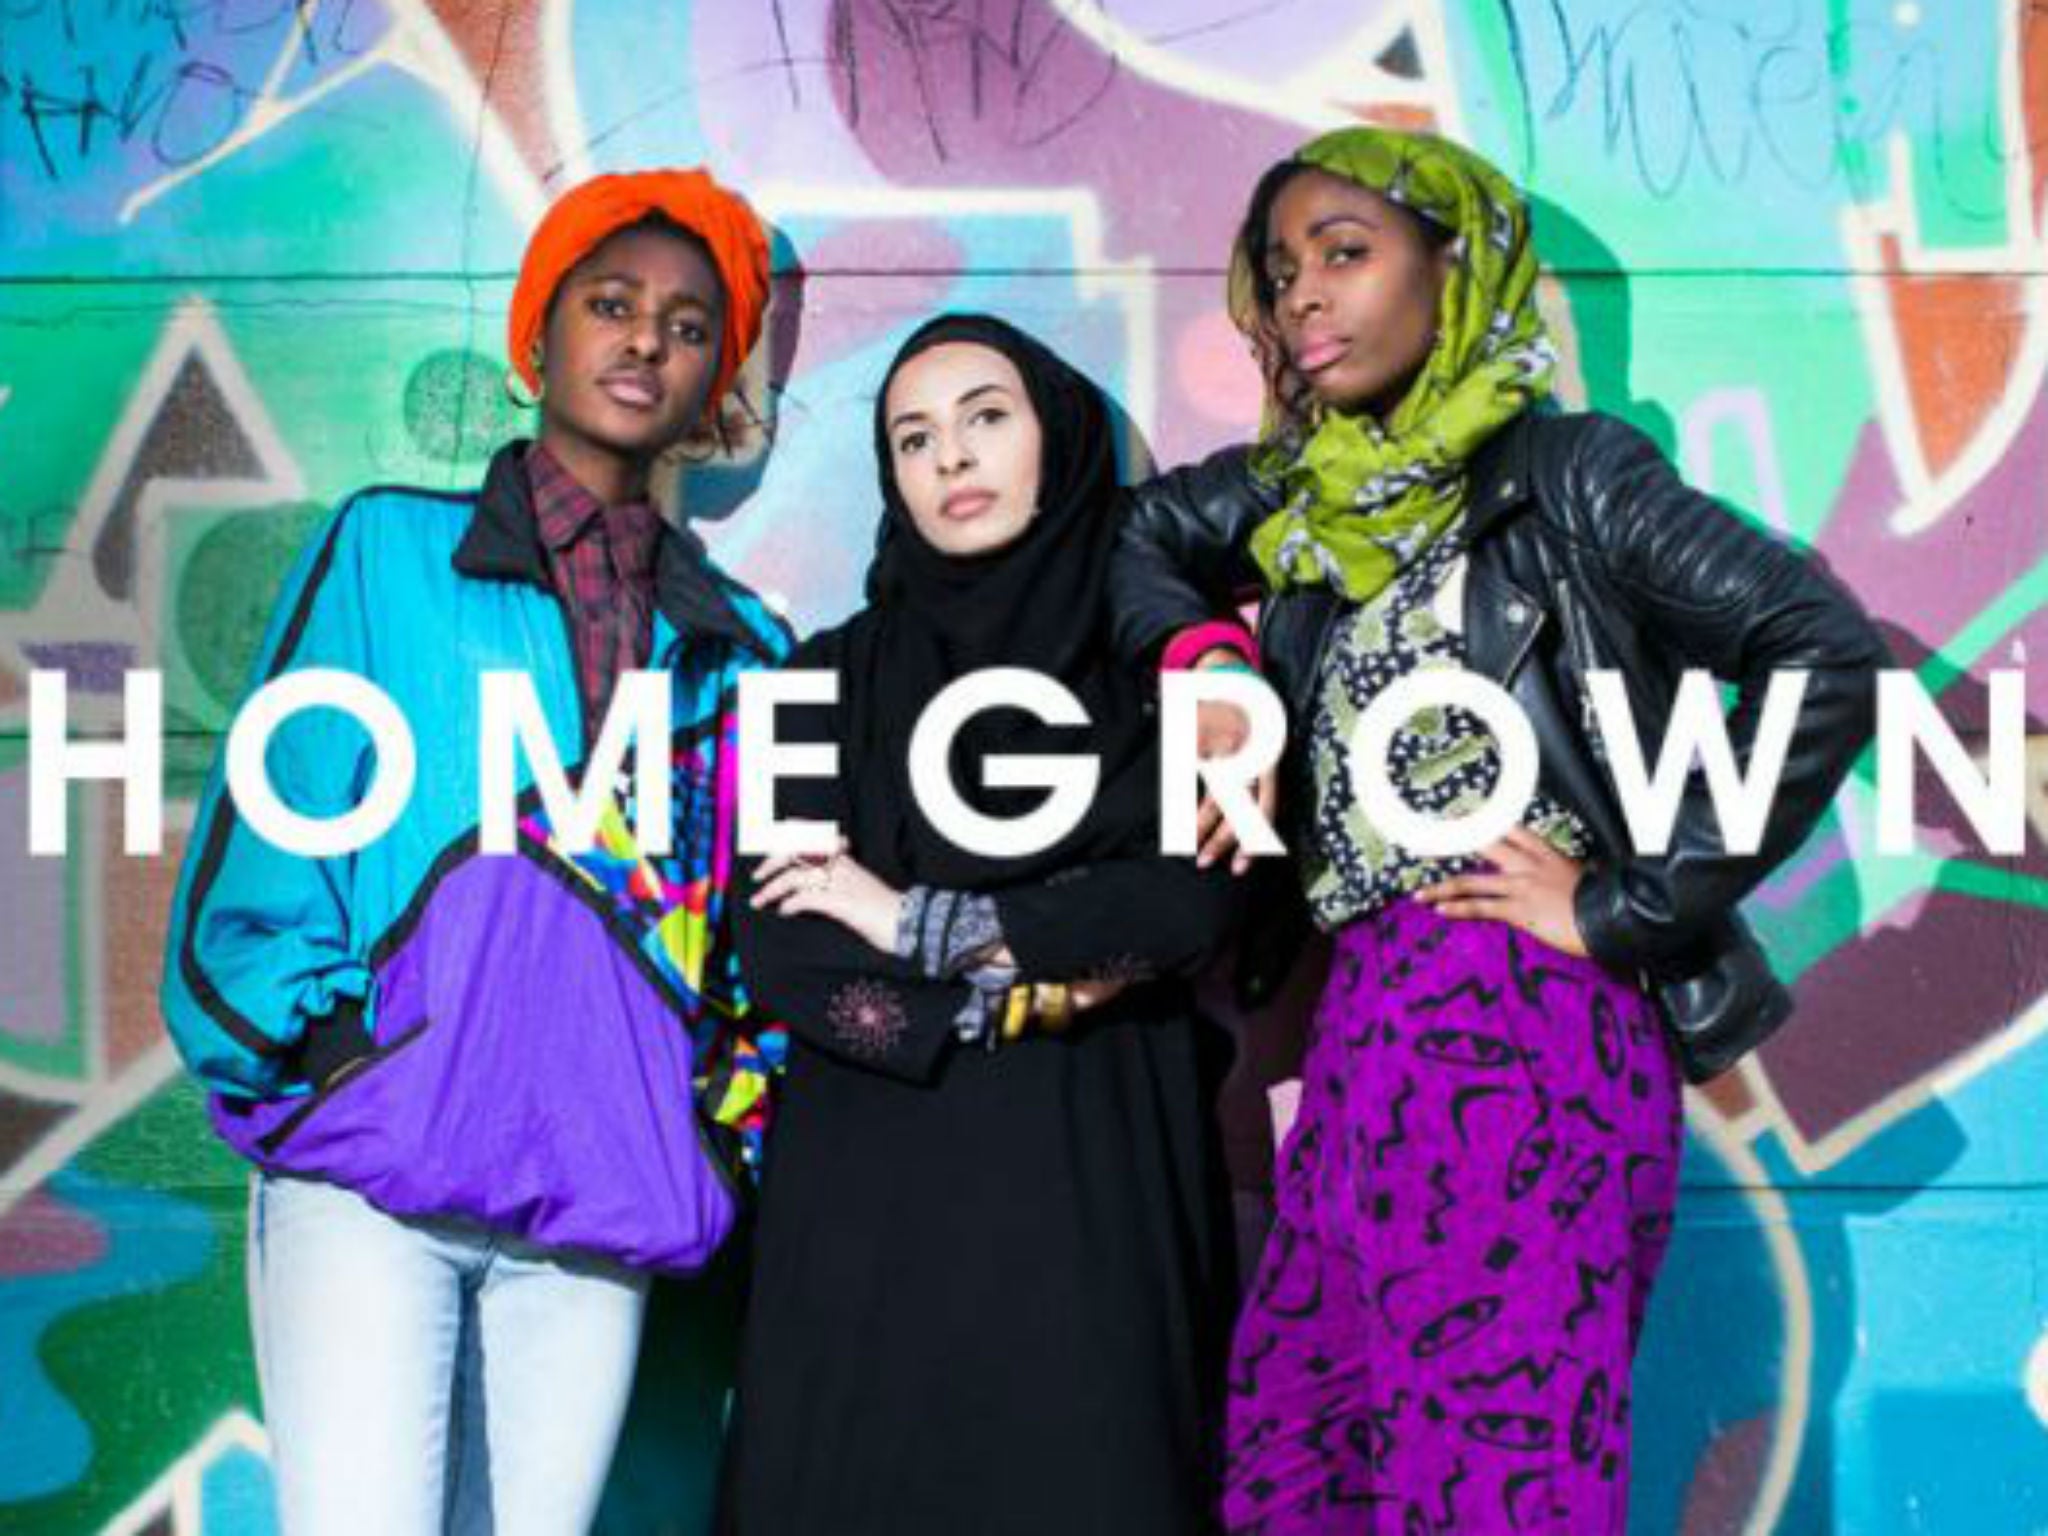 ‘Homegrown’ was cancelled by the National Youth Theatre